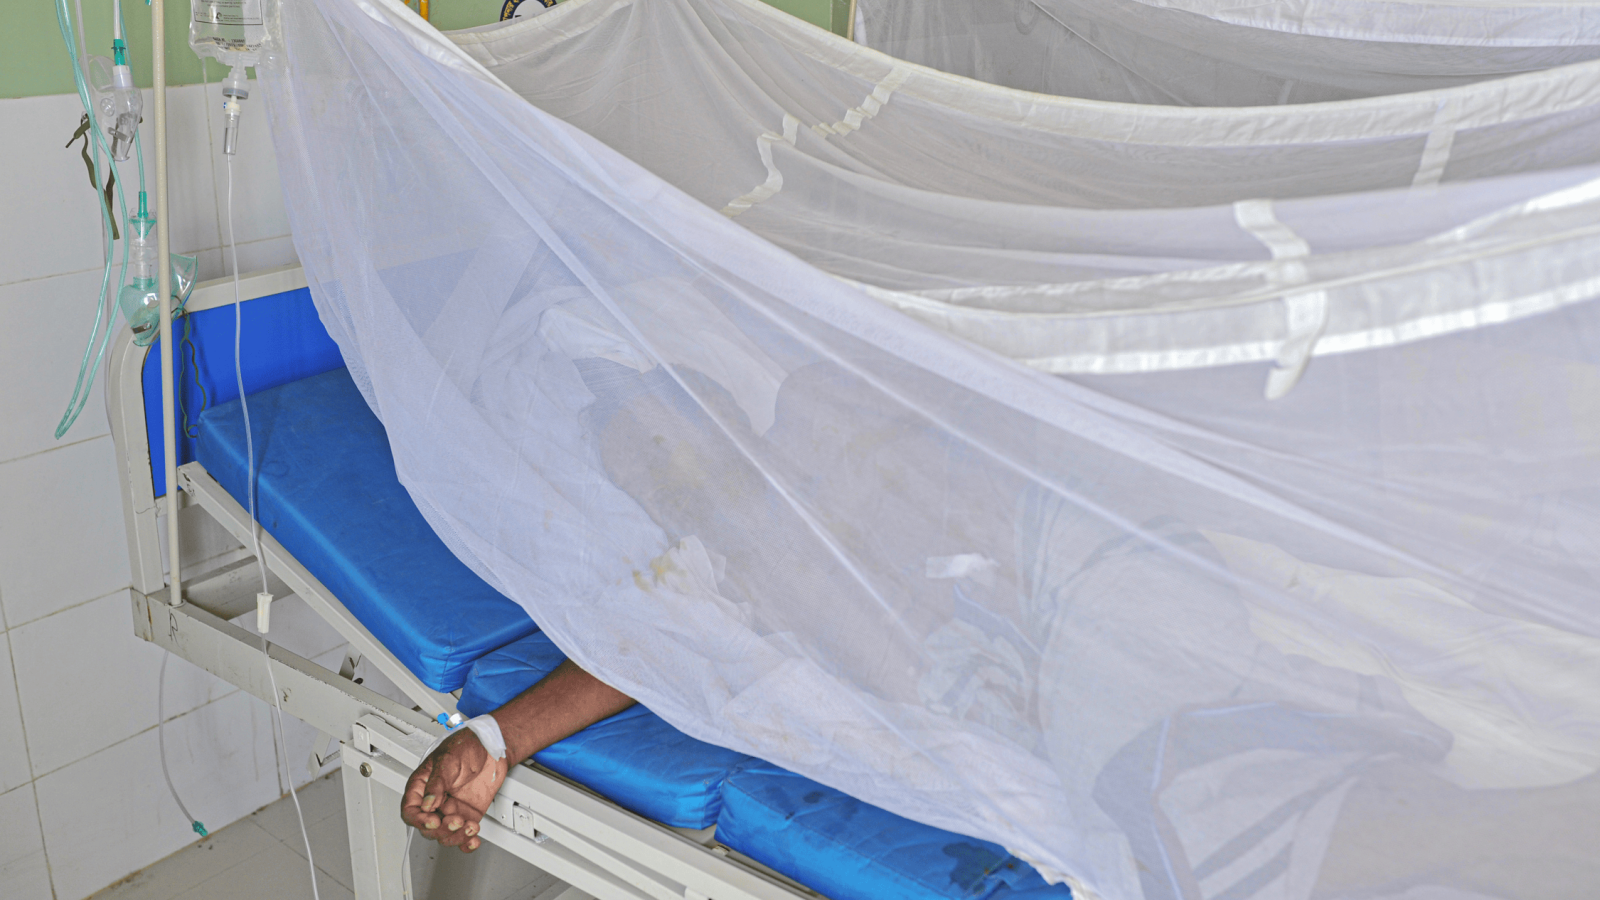 Dengue patients, protected under mosquito nets, receiving treatment in Bangladesh.